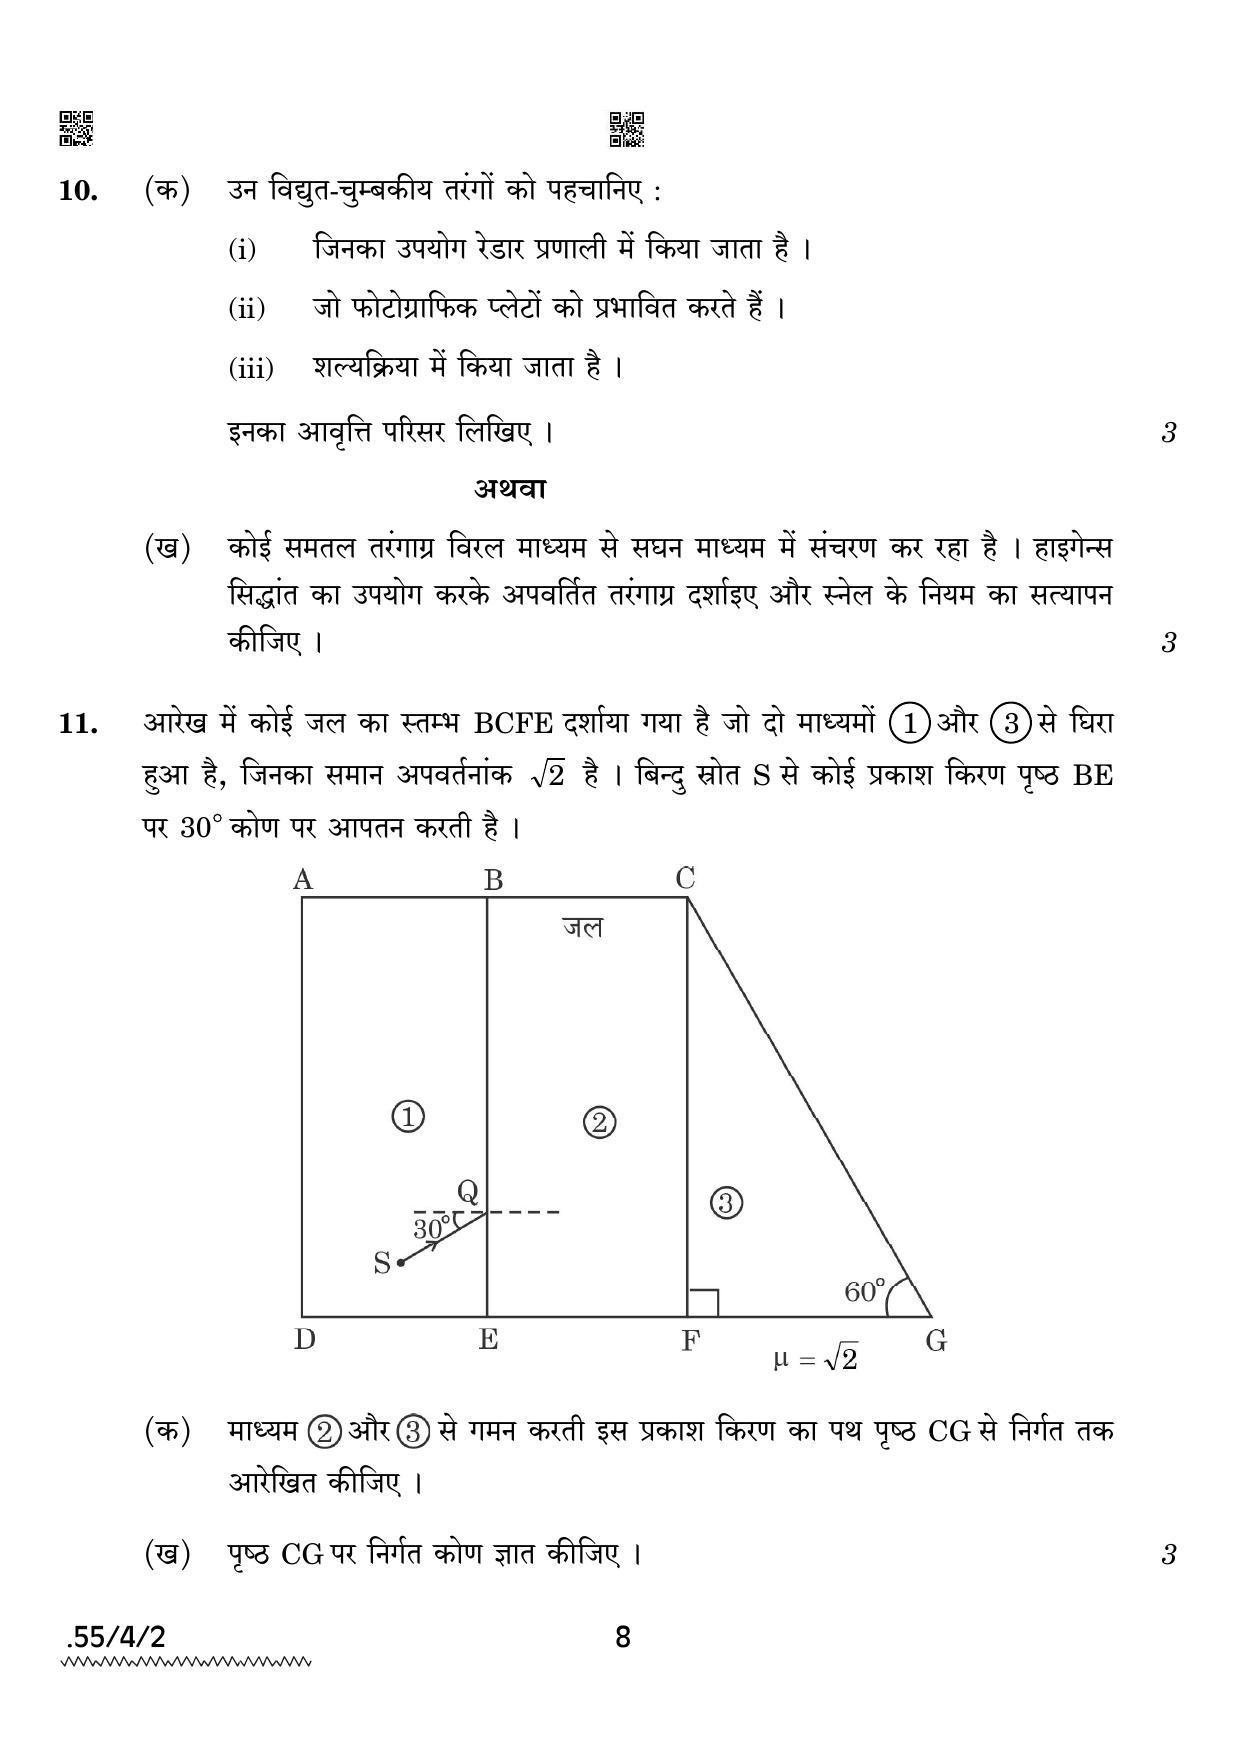 CBSE Class 12 55-4-2 Physics 2022 Question Paper - Page 8